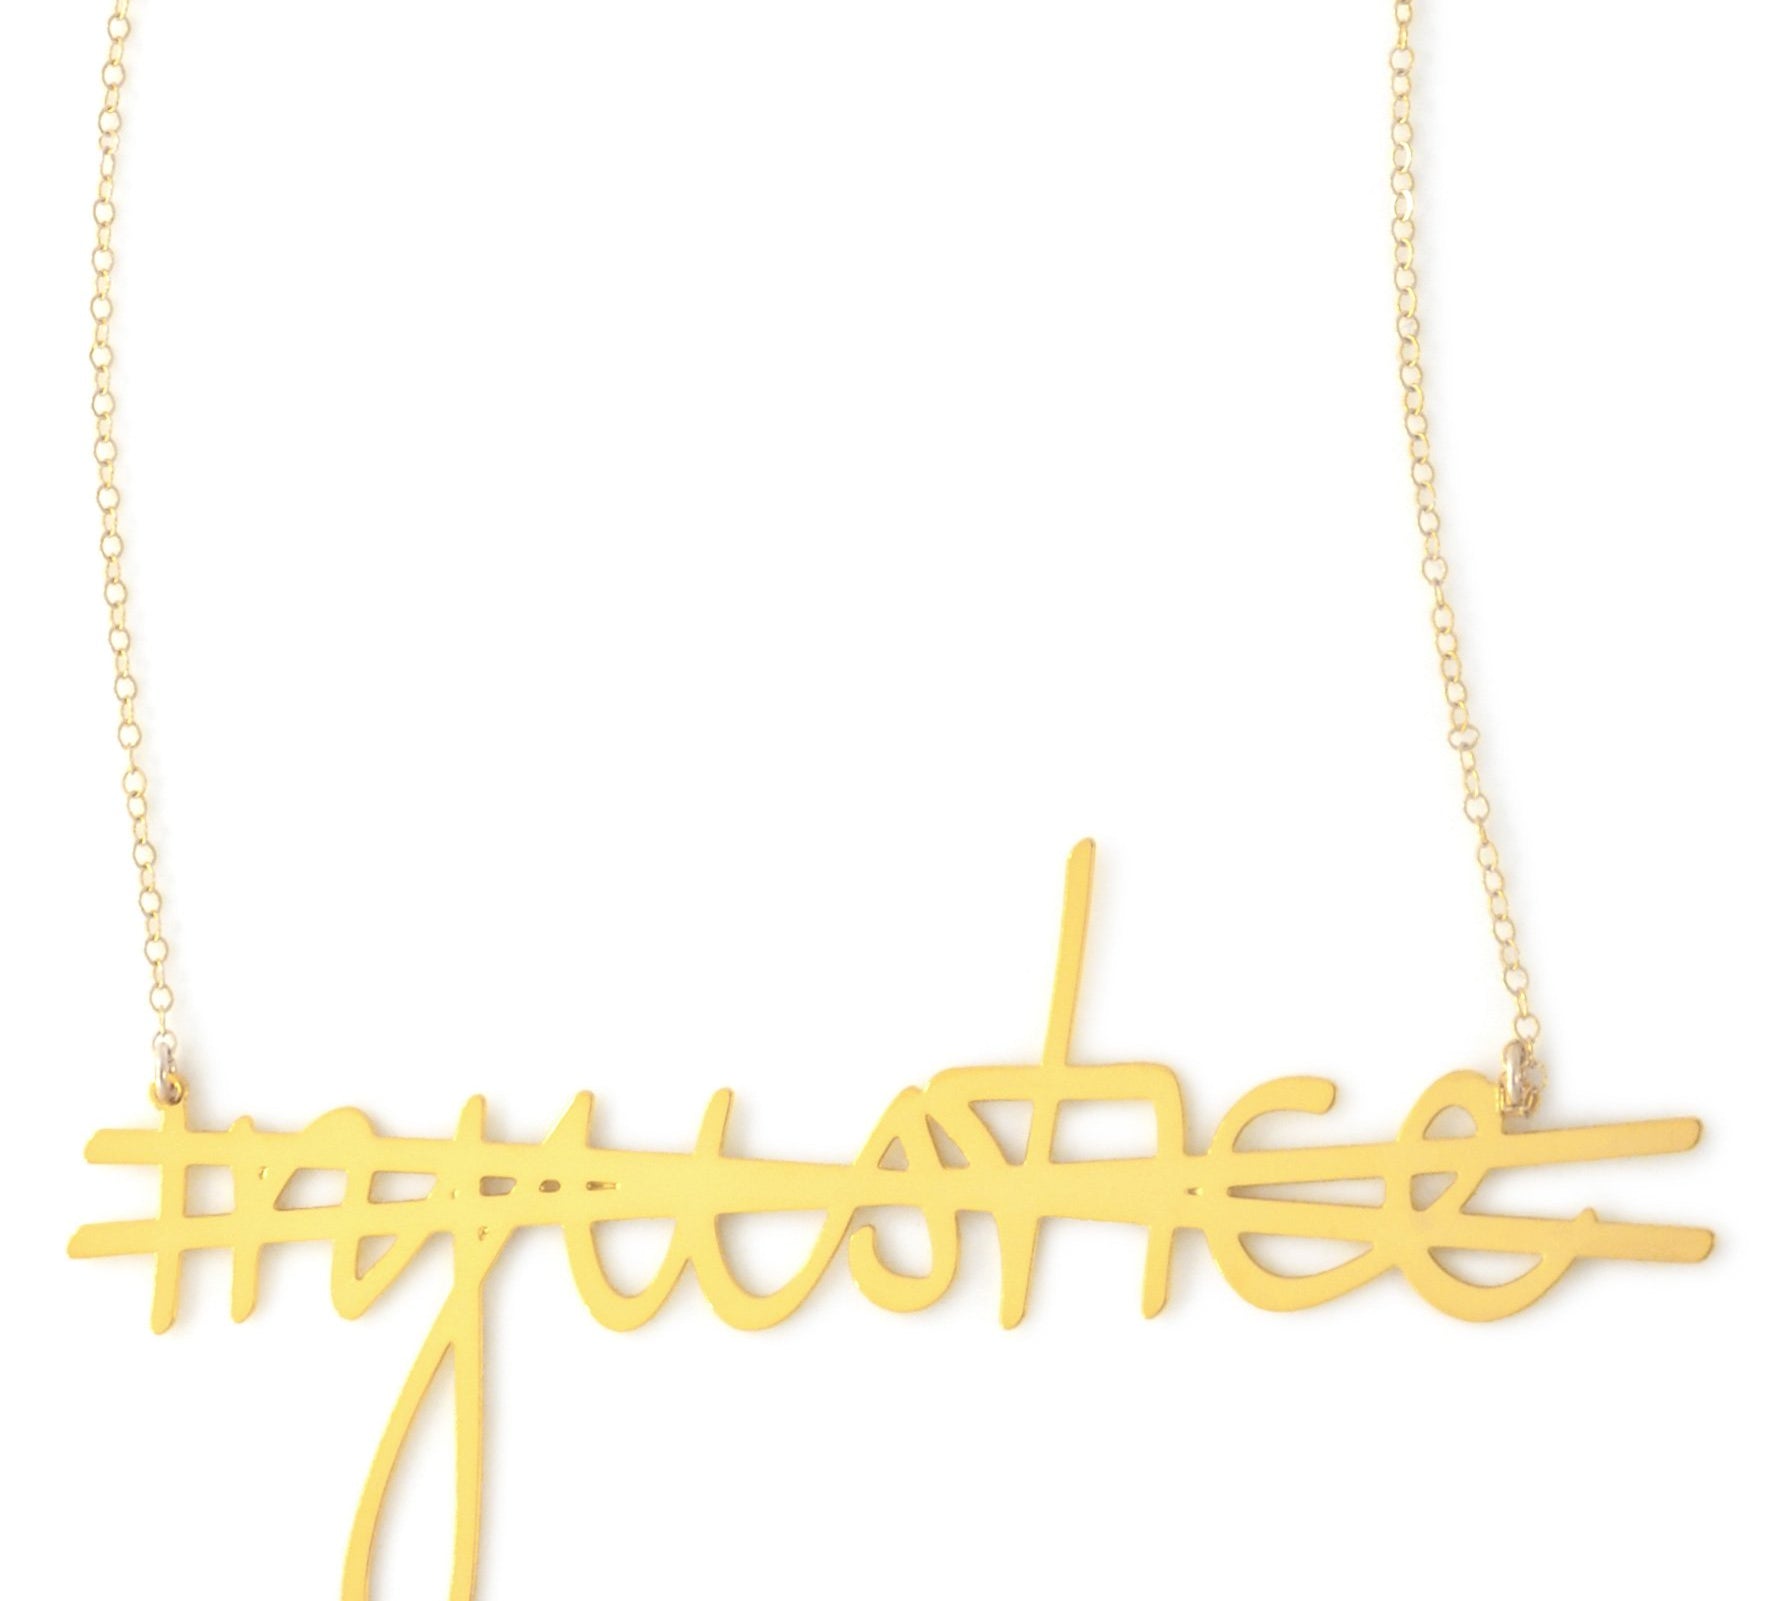 No More Injustice Necklace - High Quality, Affordable, Hand Written, Empowering, Self Love, Mantra Word Necklace - Available in Gold and Silver - Small and Large Sizes - Made in USA - Brevity Jewelry